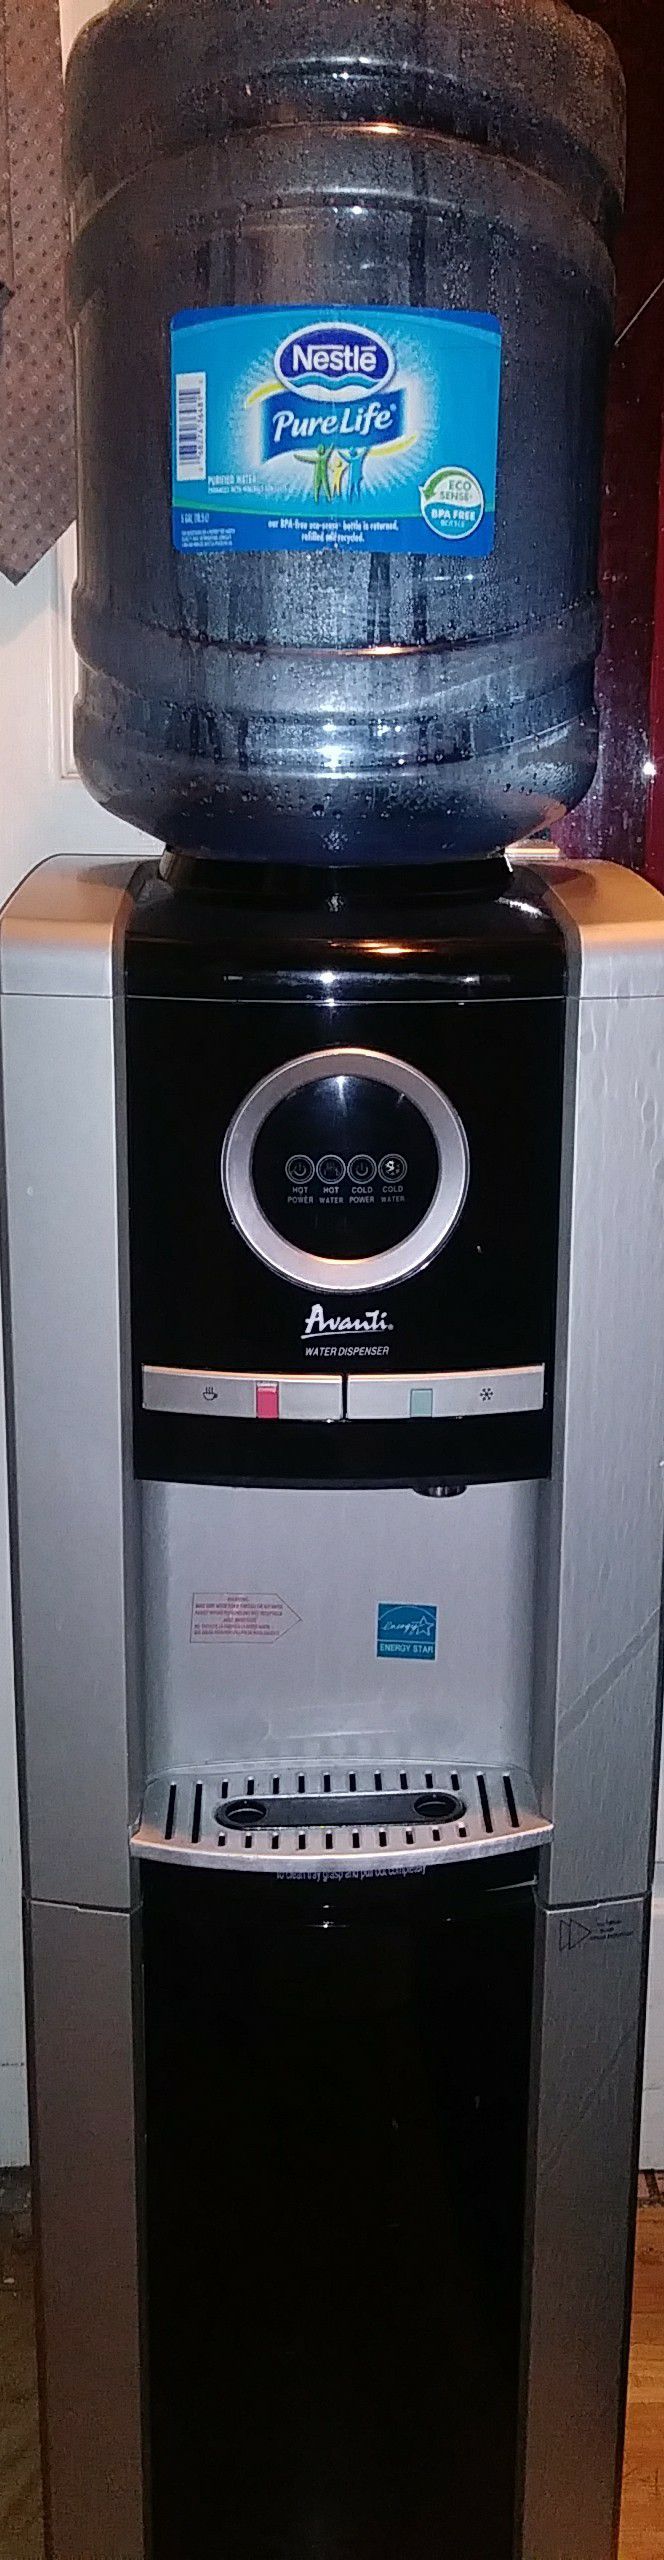 AVANTI WATER COOLER DISPENSER (HOT AND COLD)